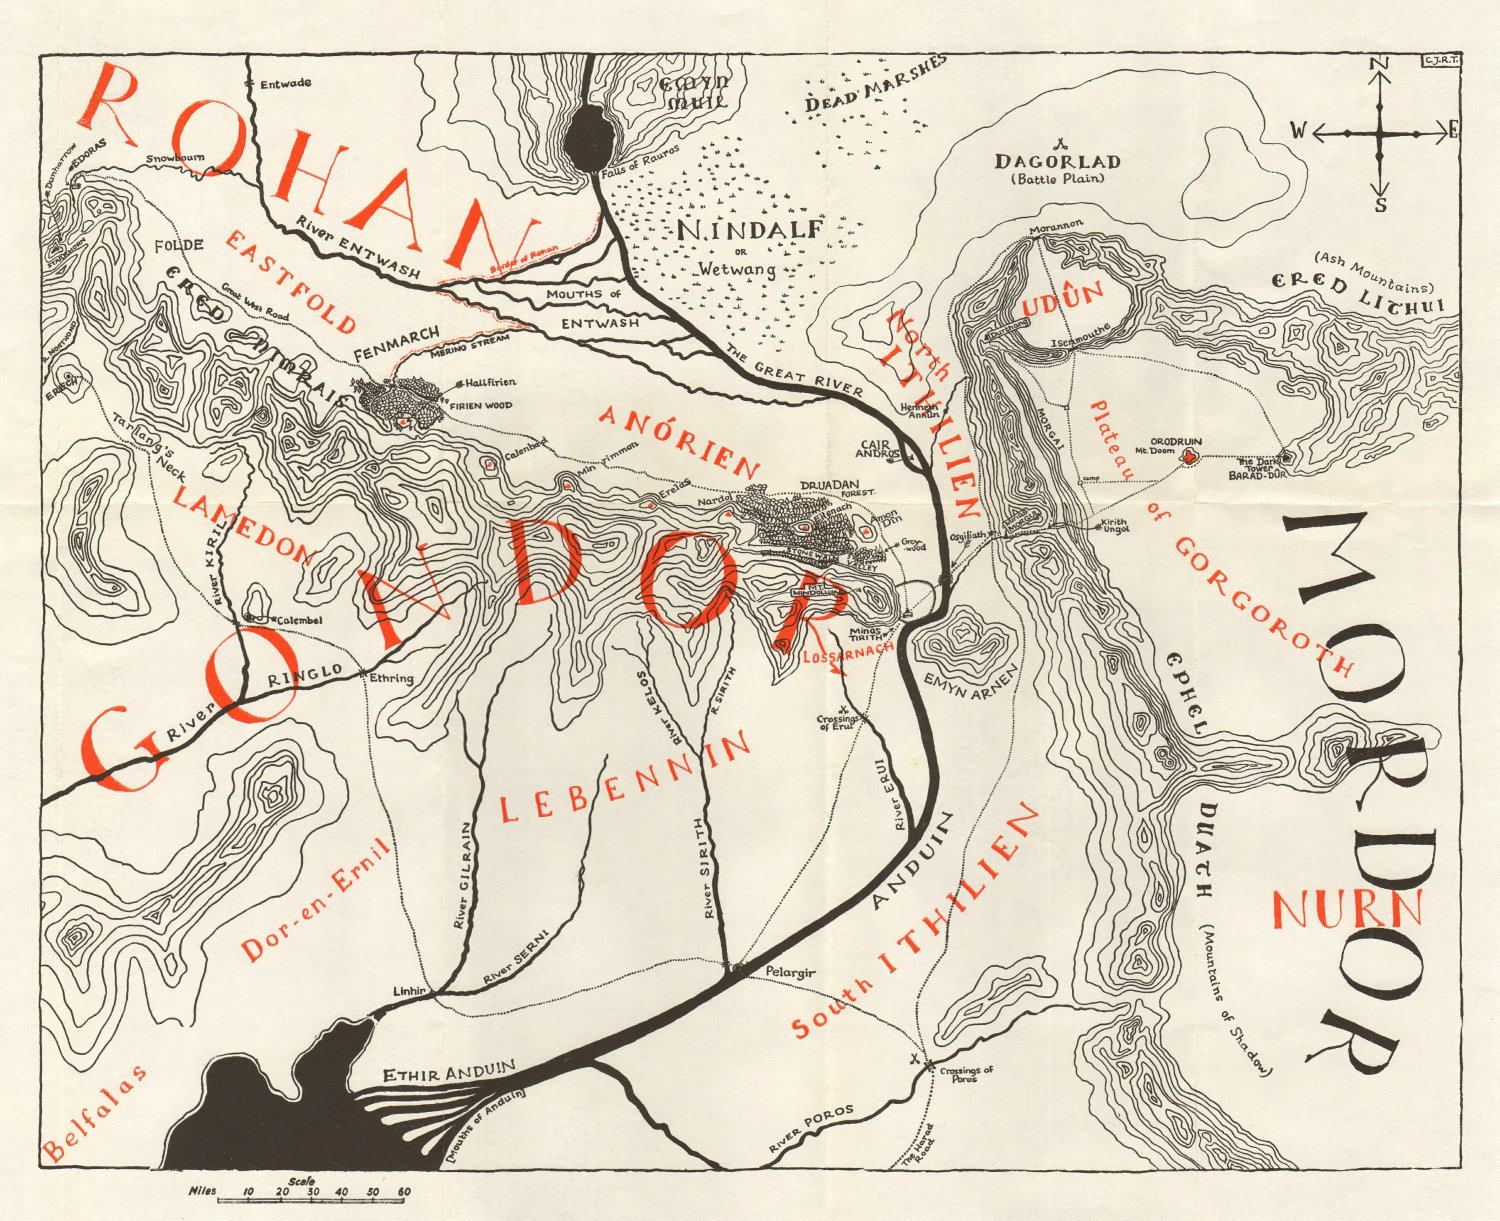 Associate Product MIDDLE EARTH. Lord of the Rings. Gondor Mordor Rohan Mount Doom TOLKIEN 1966 map